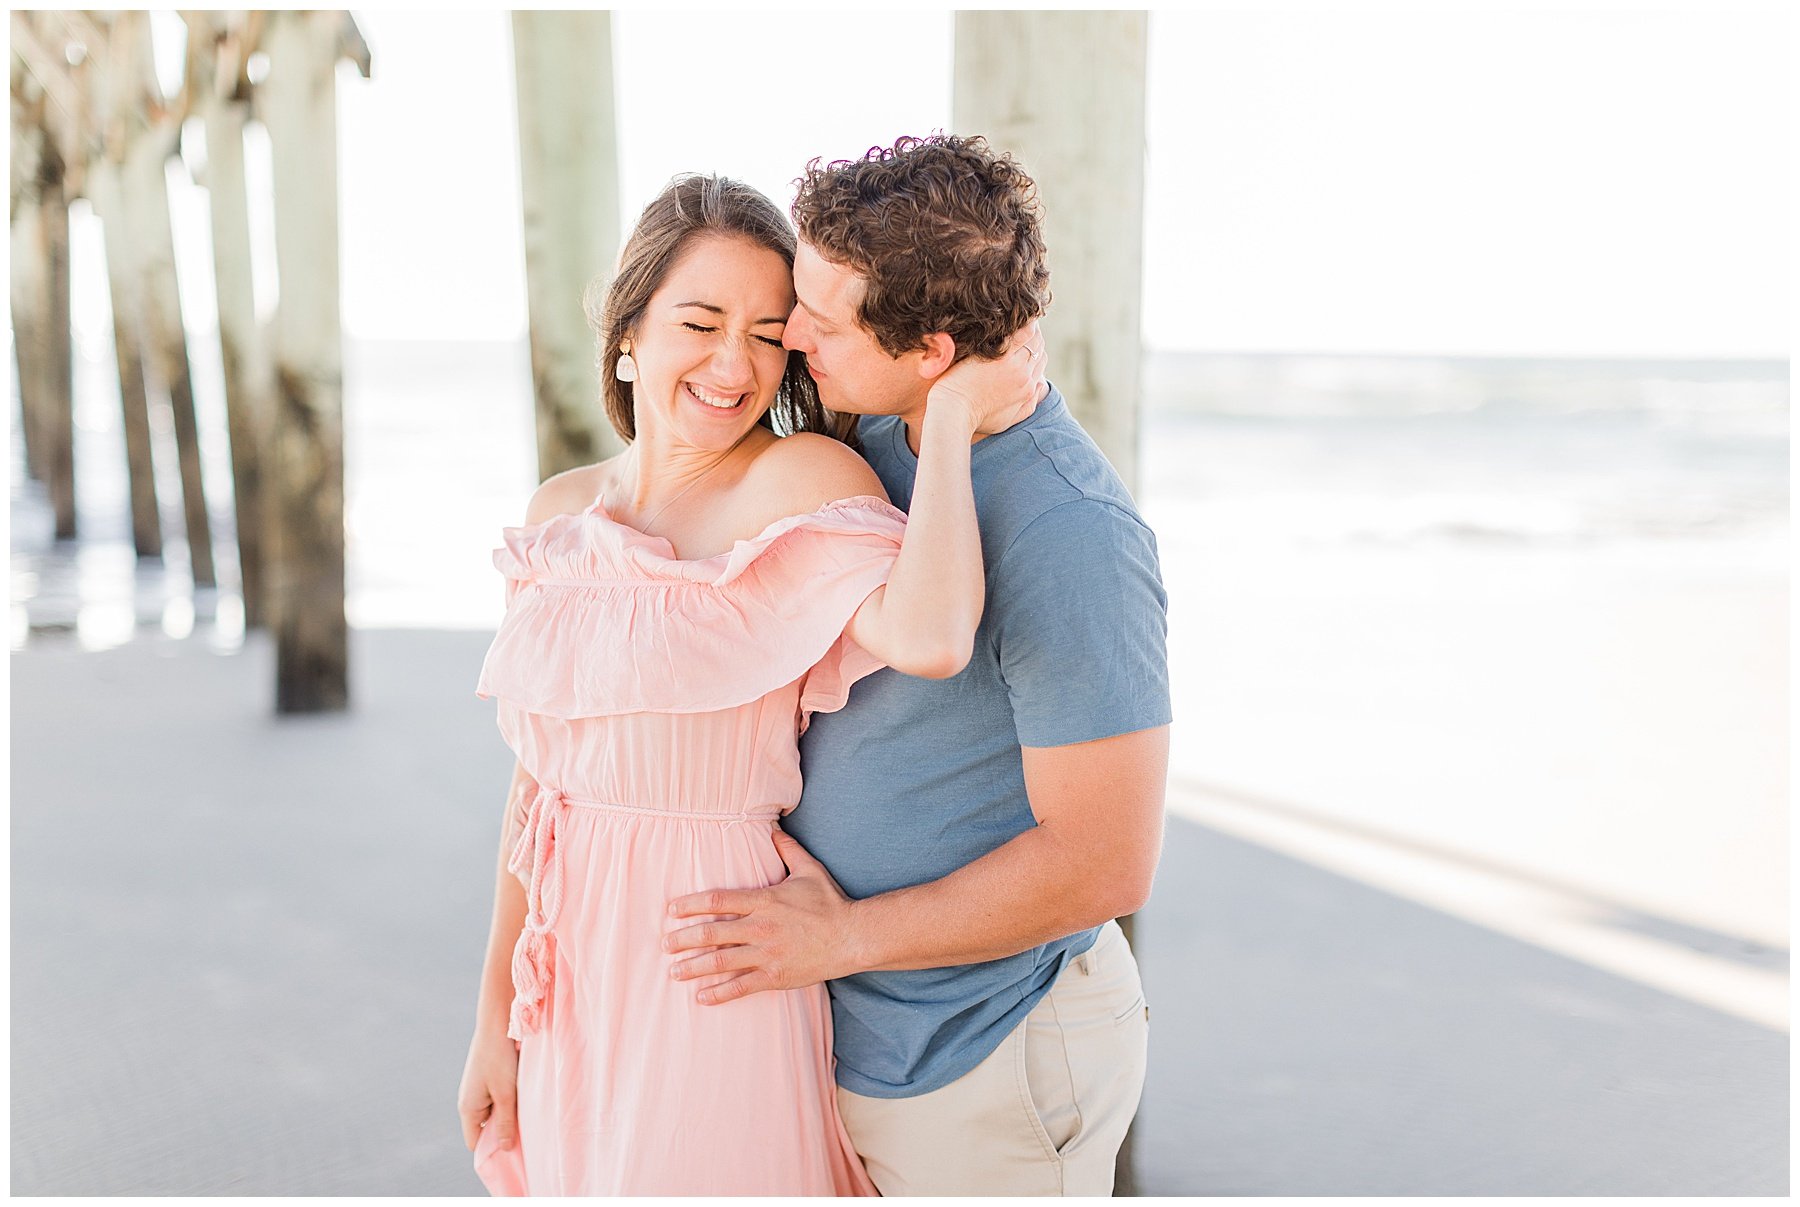 surf city engagement session wrightsville beach engagement session wilmington wedding photographer ashley christ photography_0019.jpg